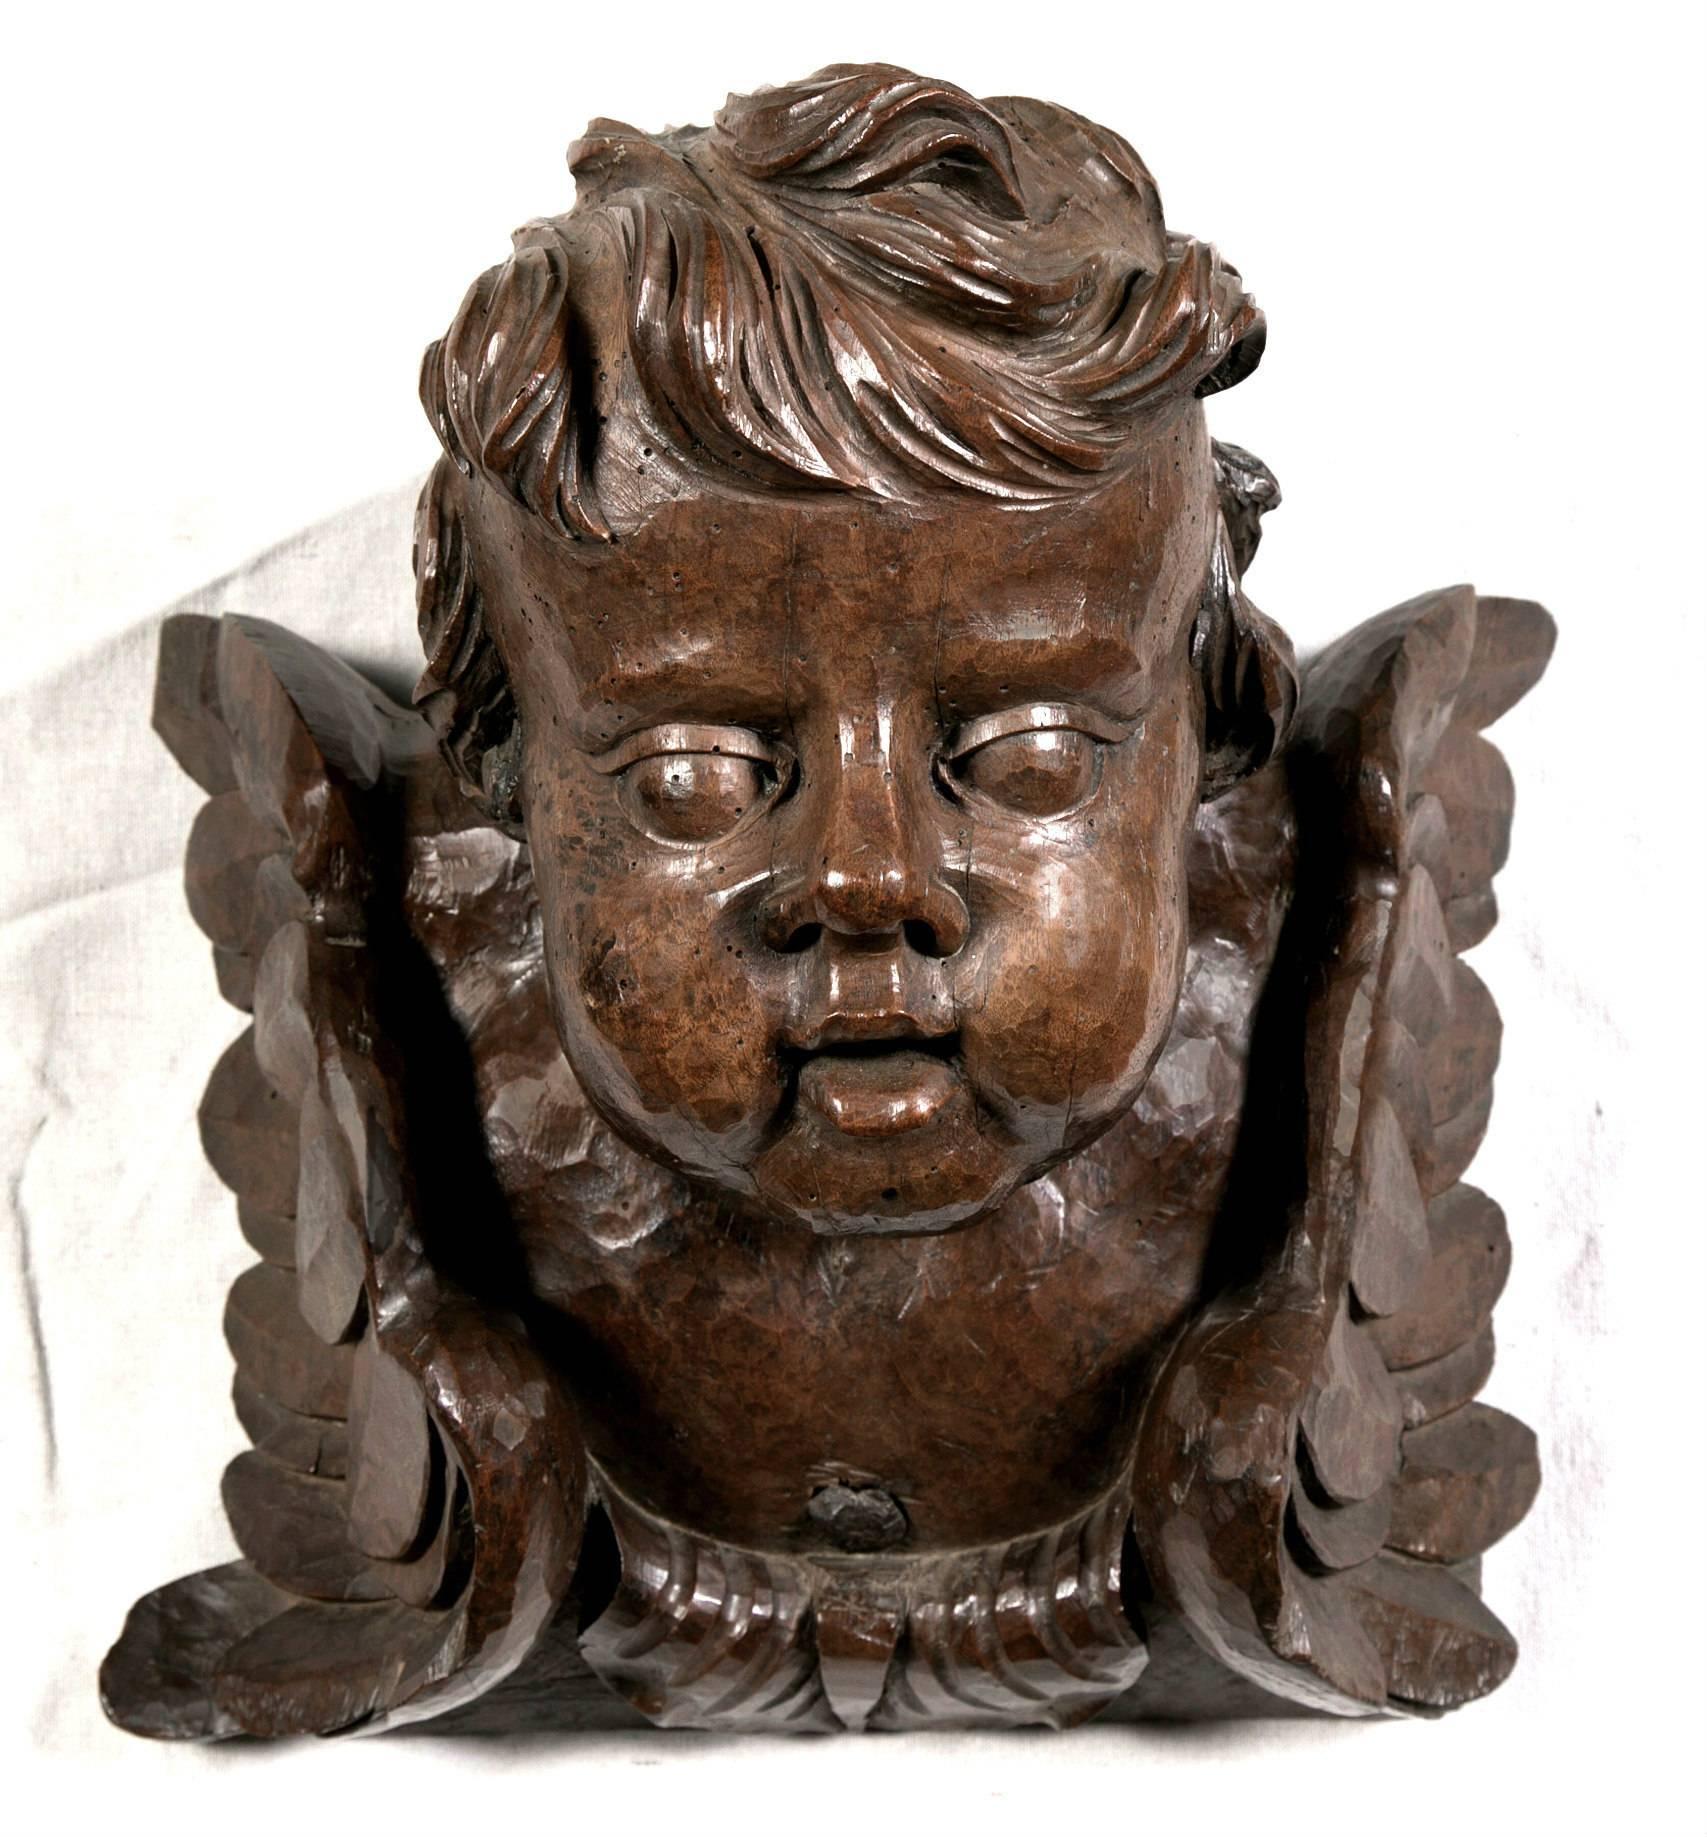 A sensational set of four intricately carved 18th century Baroque Italian cherubim. Hand-carved by a master artisan, this set of solid walnut cherubs came from a small church near Florence. All the elegance and high style of the Baroque period are